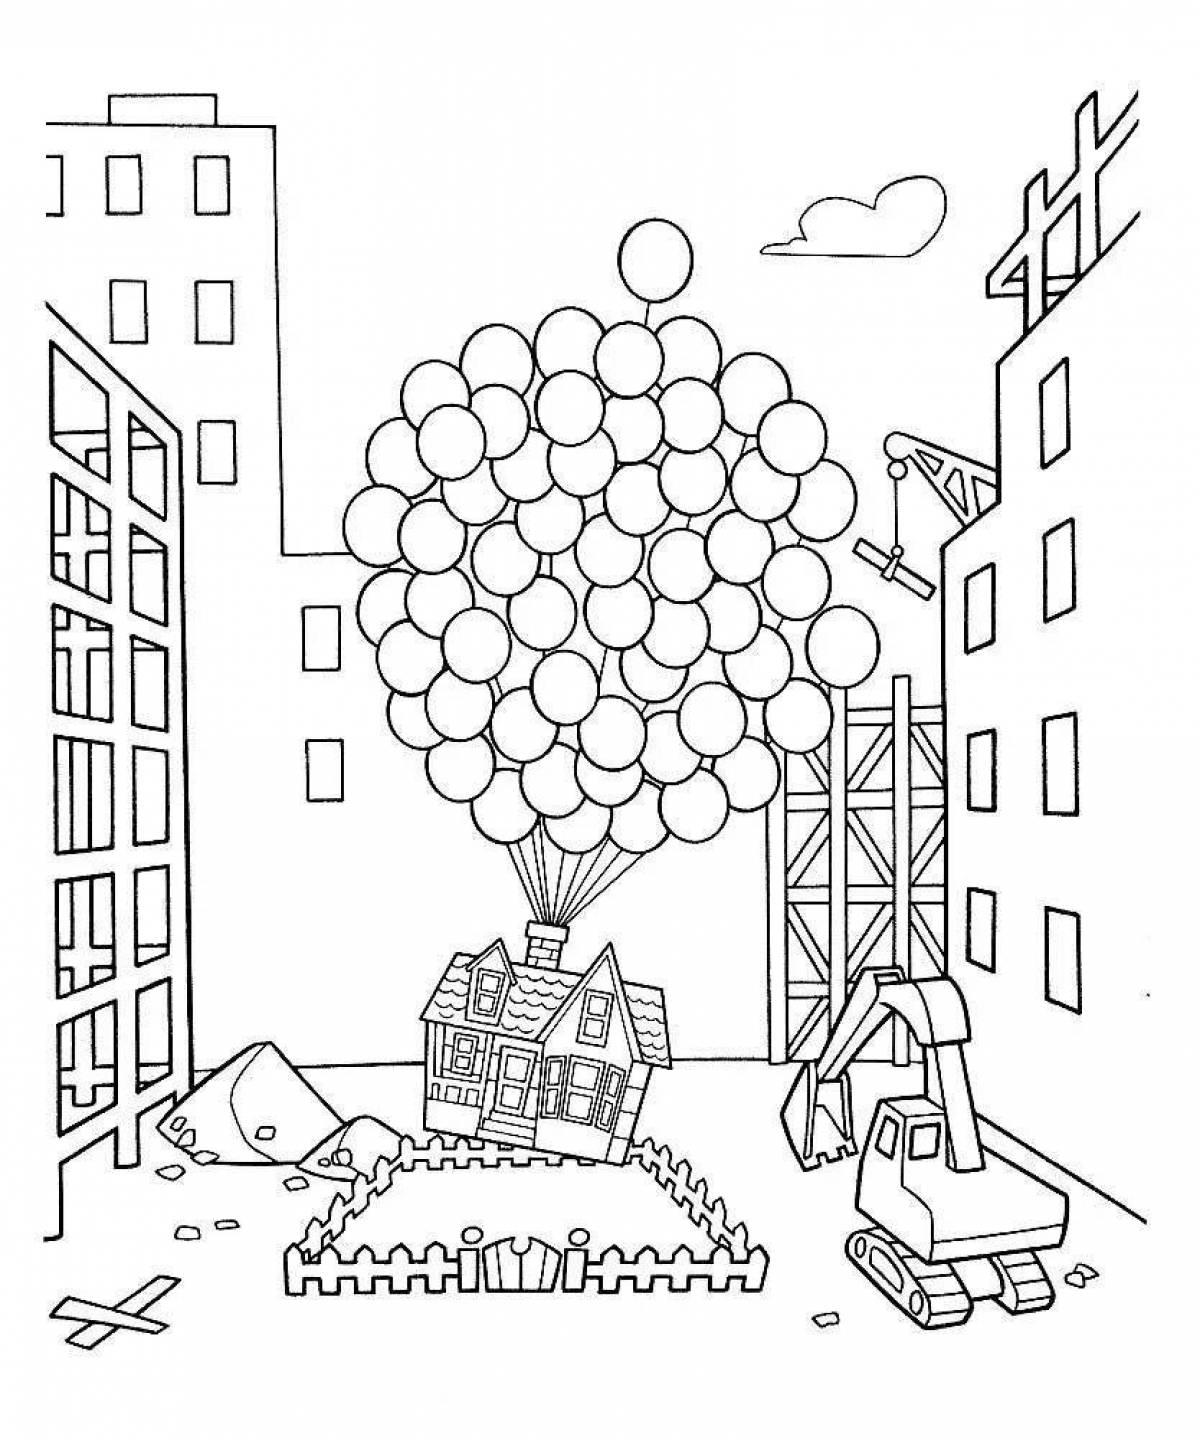 Intriguing coloring page up